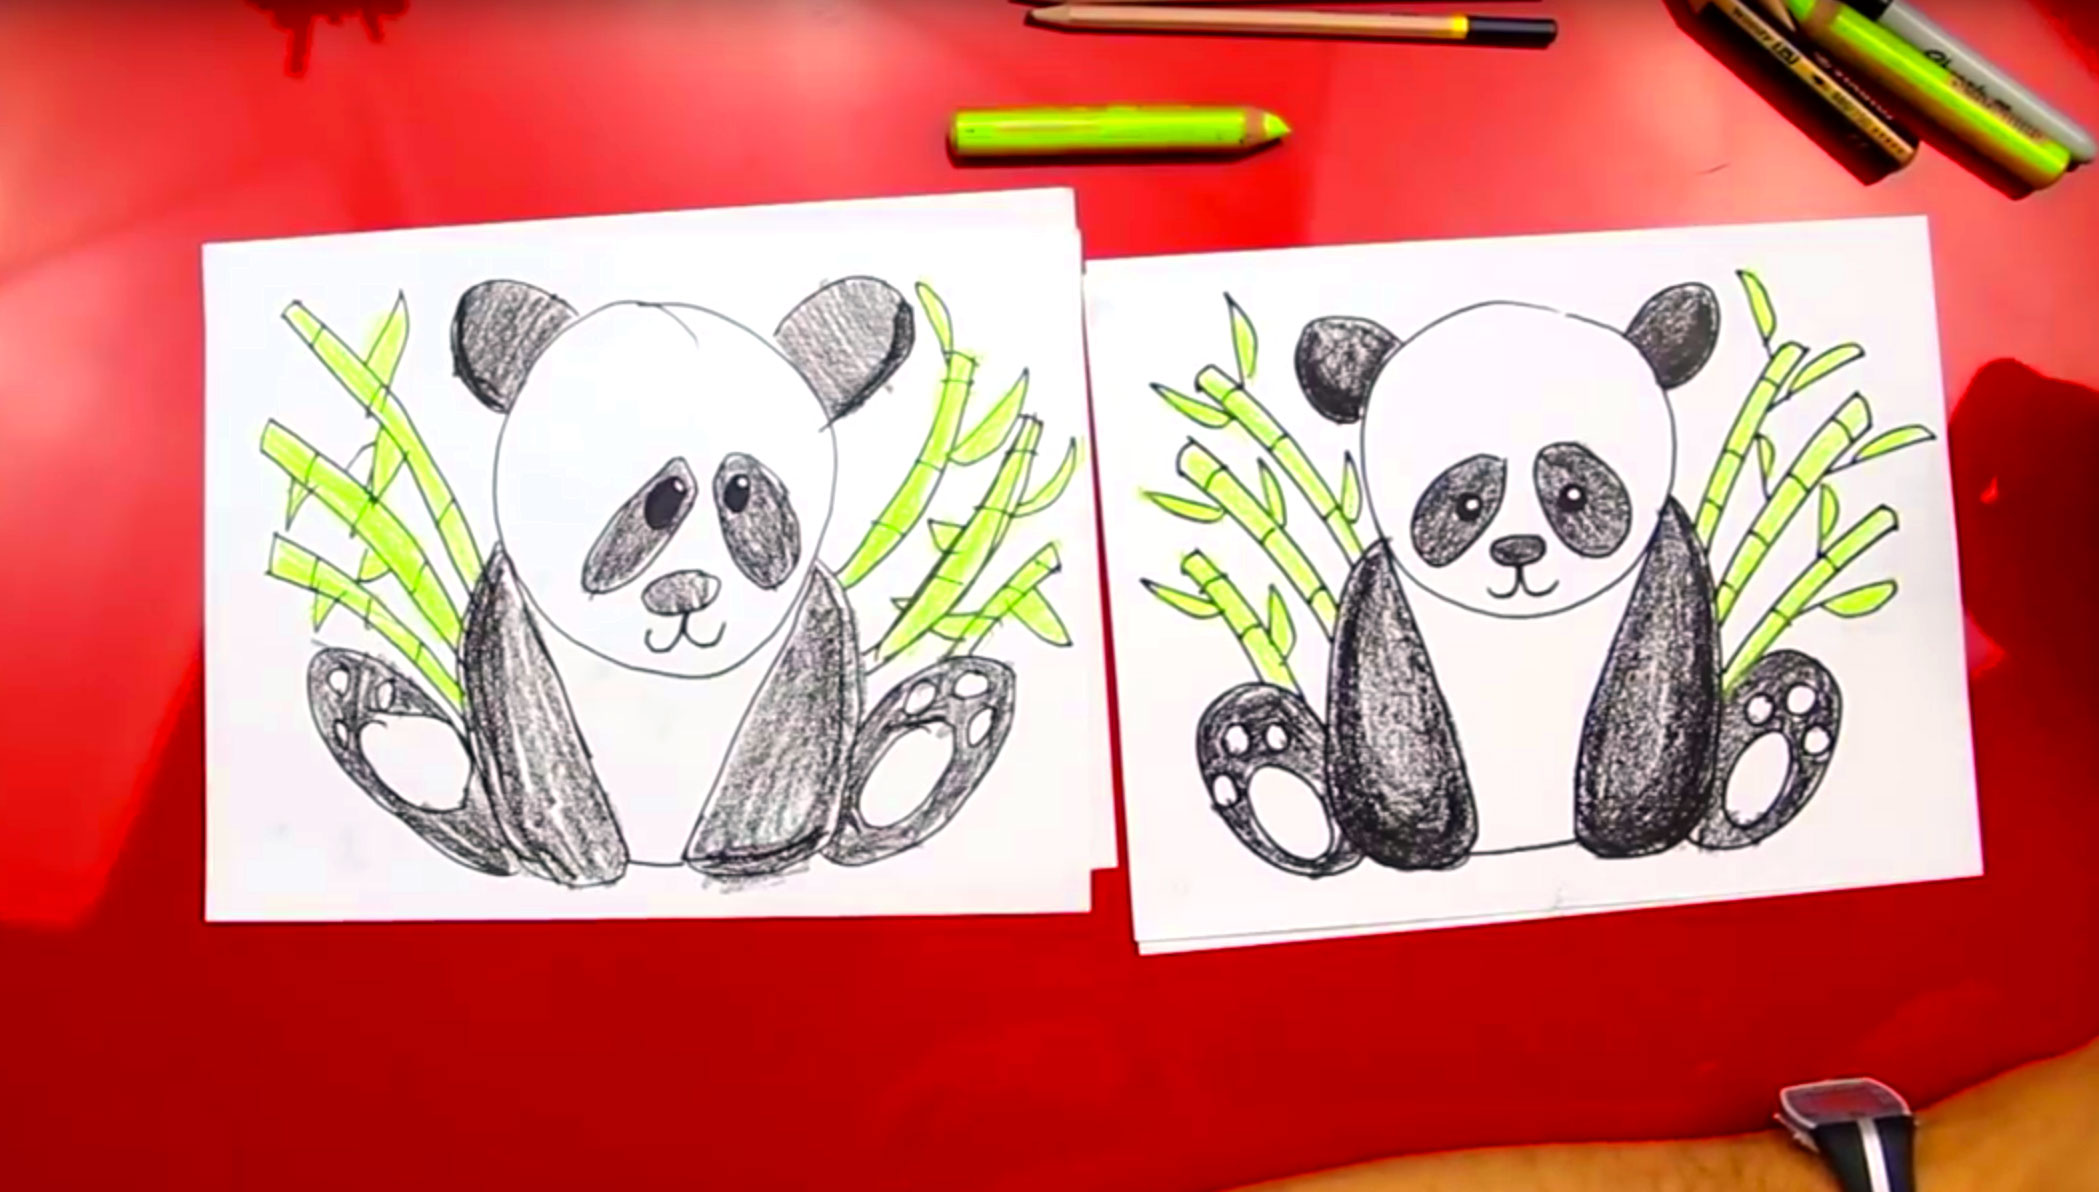 How to Draw a Panda (with Pictures) - wikiHow Fun